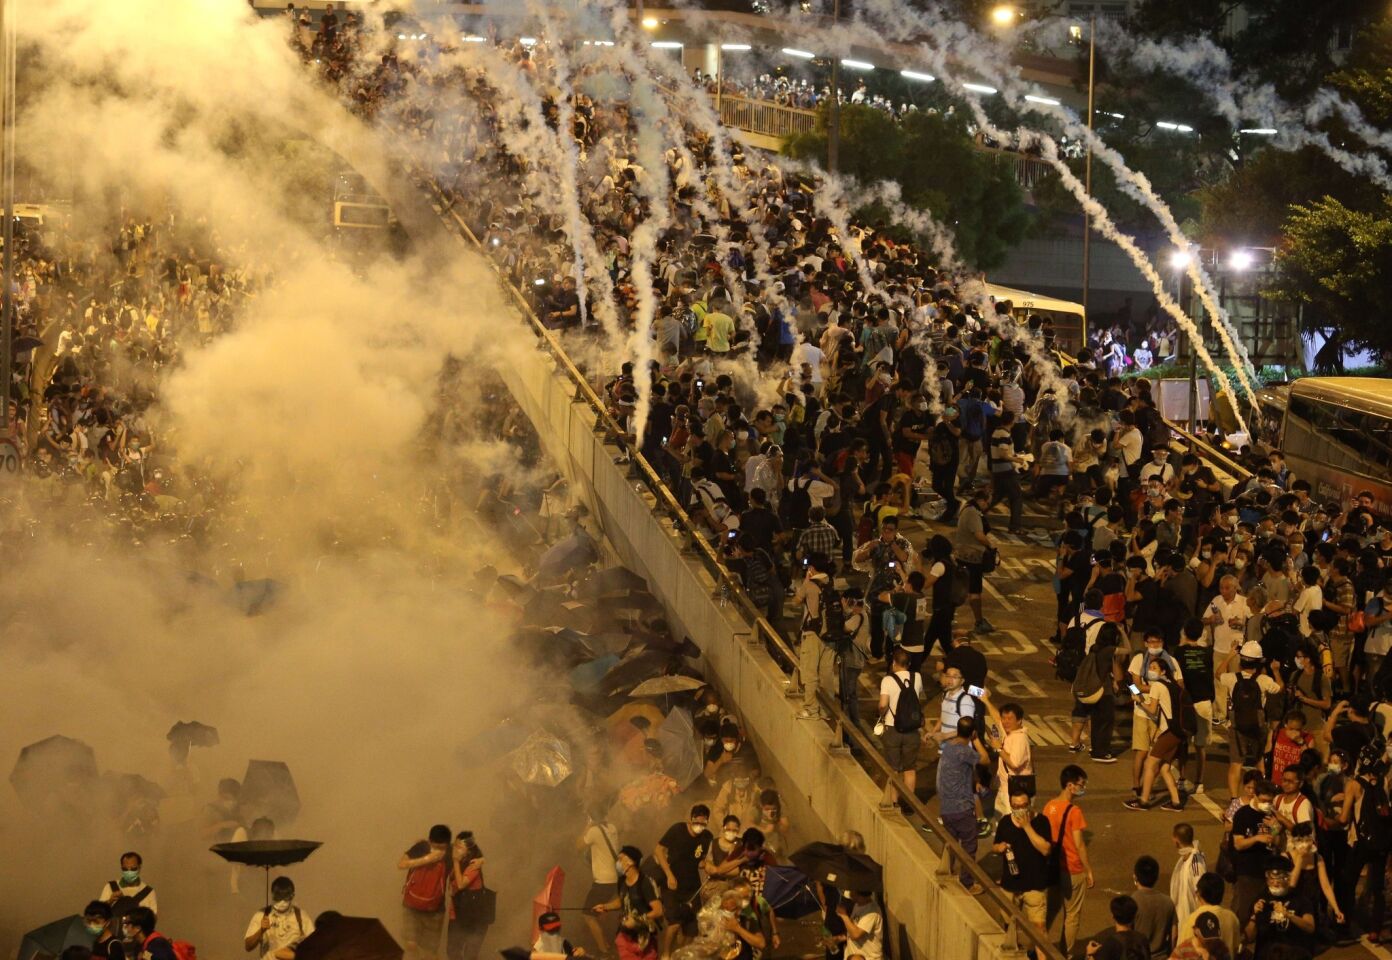 Police fire tear gas at pro-democracy demonstrators near the Hong Kong government headquarters on Sept. 28, 2014.